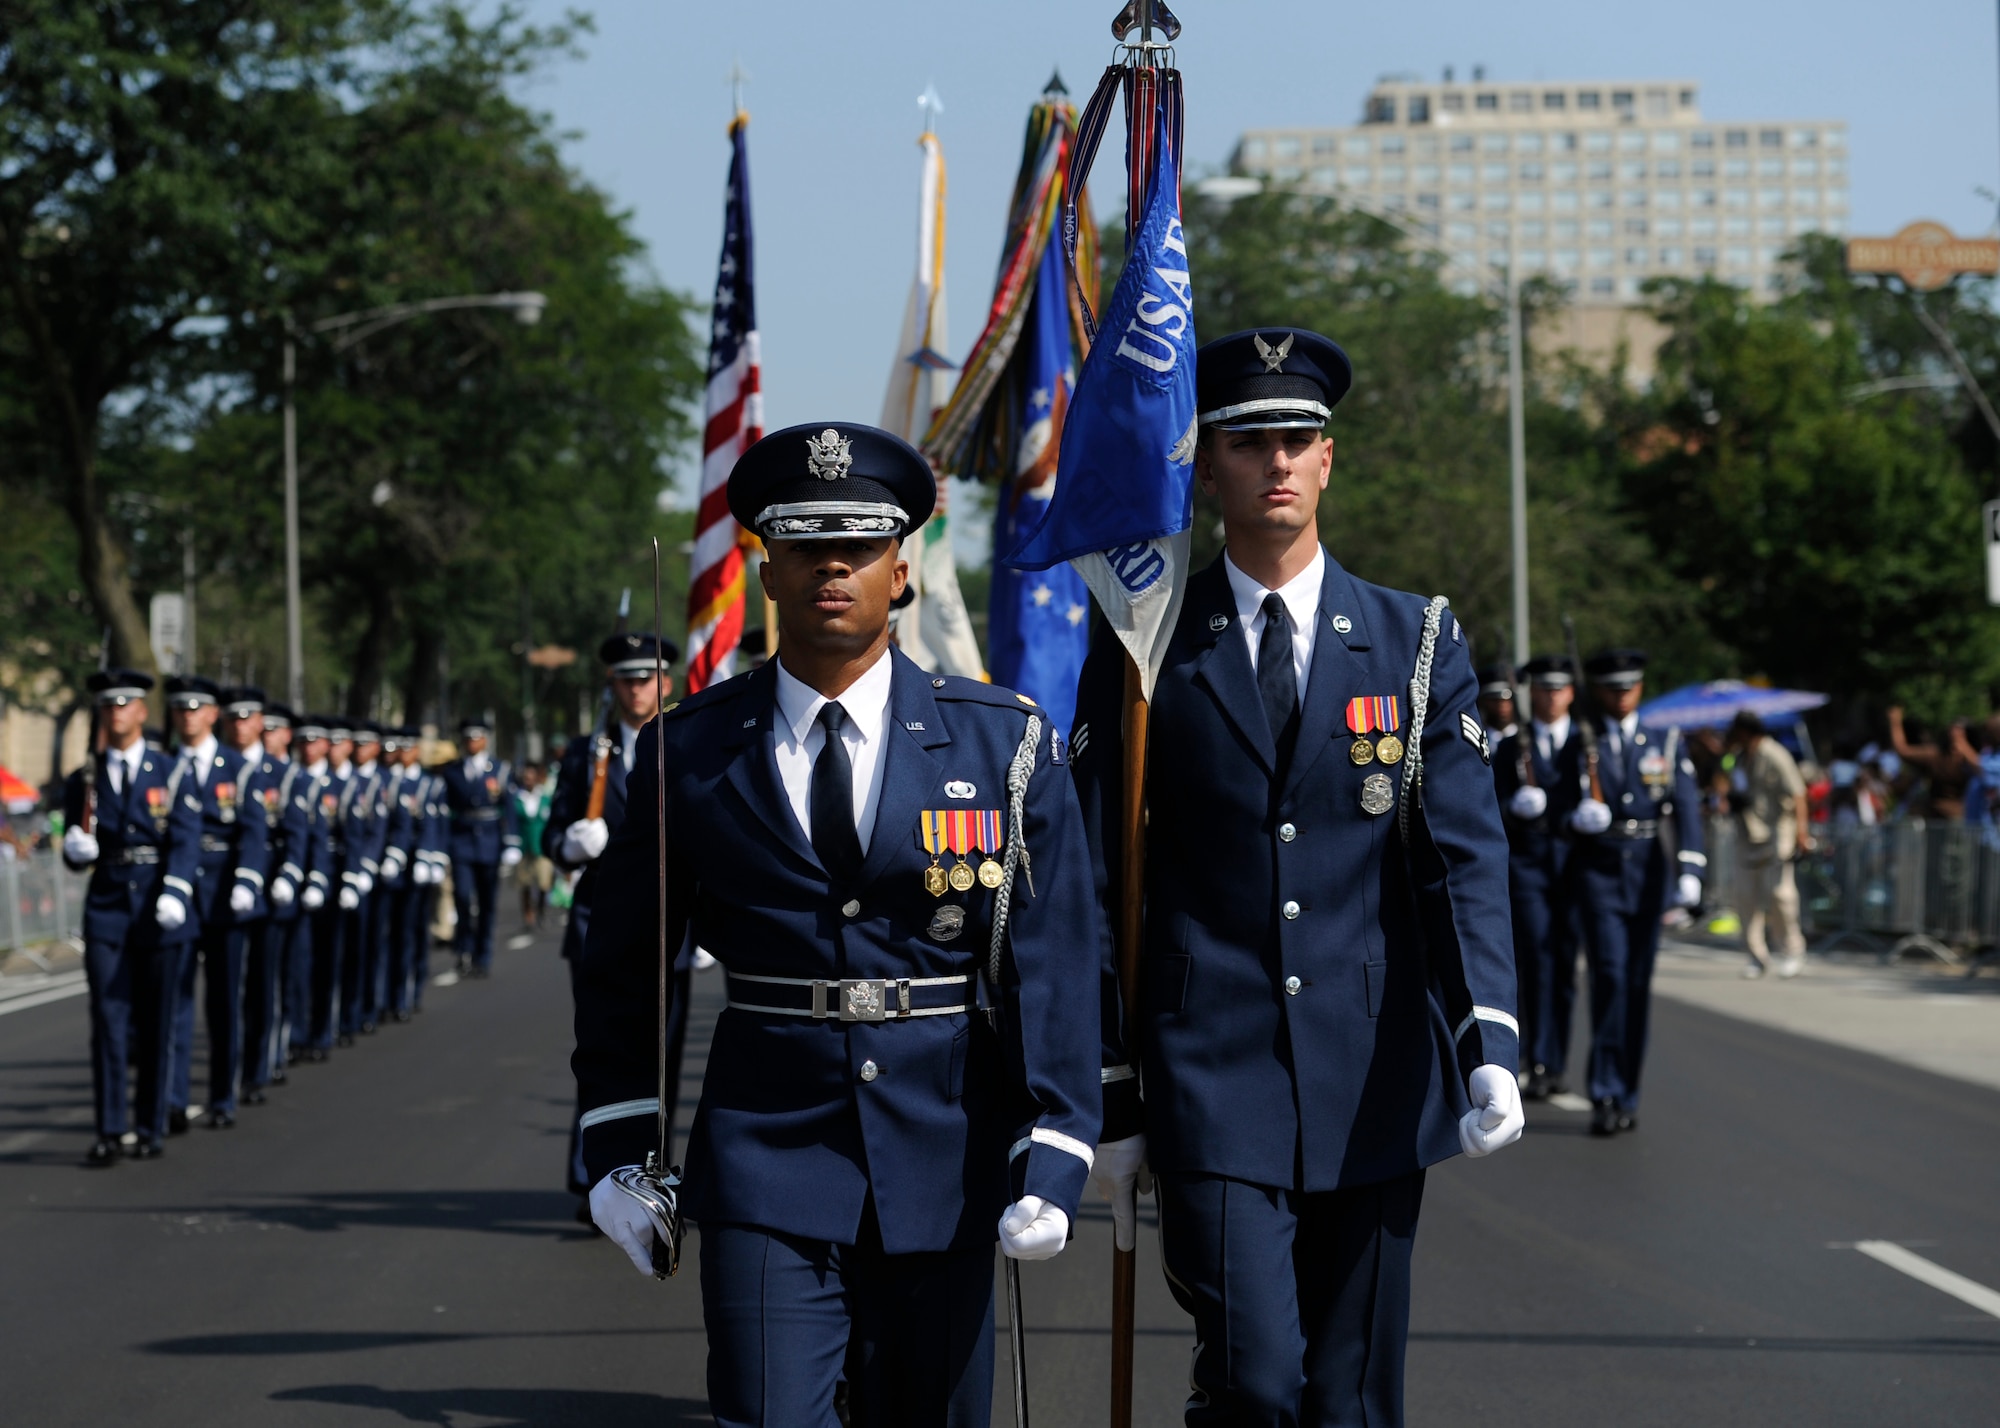 Maj. Scott Belton and Senior Airman Nicholas Priest lead the United States Air Force Color Team and ceremonial guardsmen during the Bud Billiken Parade in Chicago, Il., August 9, 2014.  Belton is the Assistant Director of Operations and Priest is a member of the Color Flight Team within the USAF Honor Guard. (U.S. Air Force photo/ Senior Airman Nesha Humes)